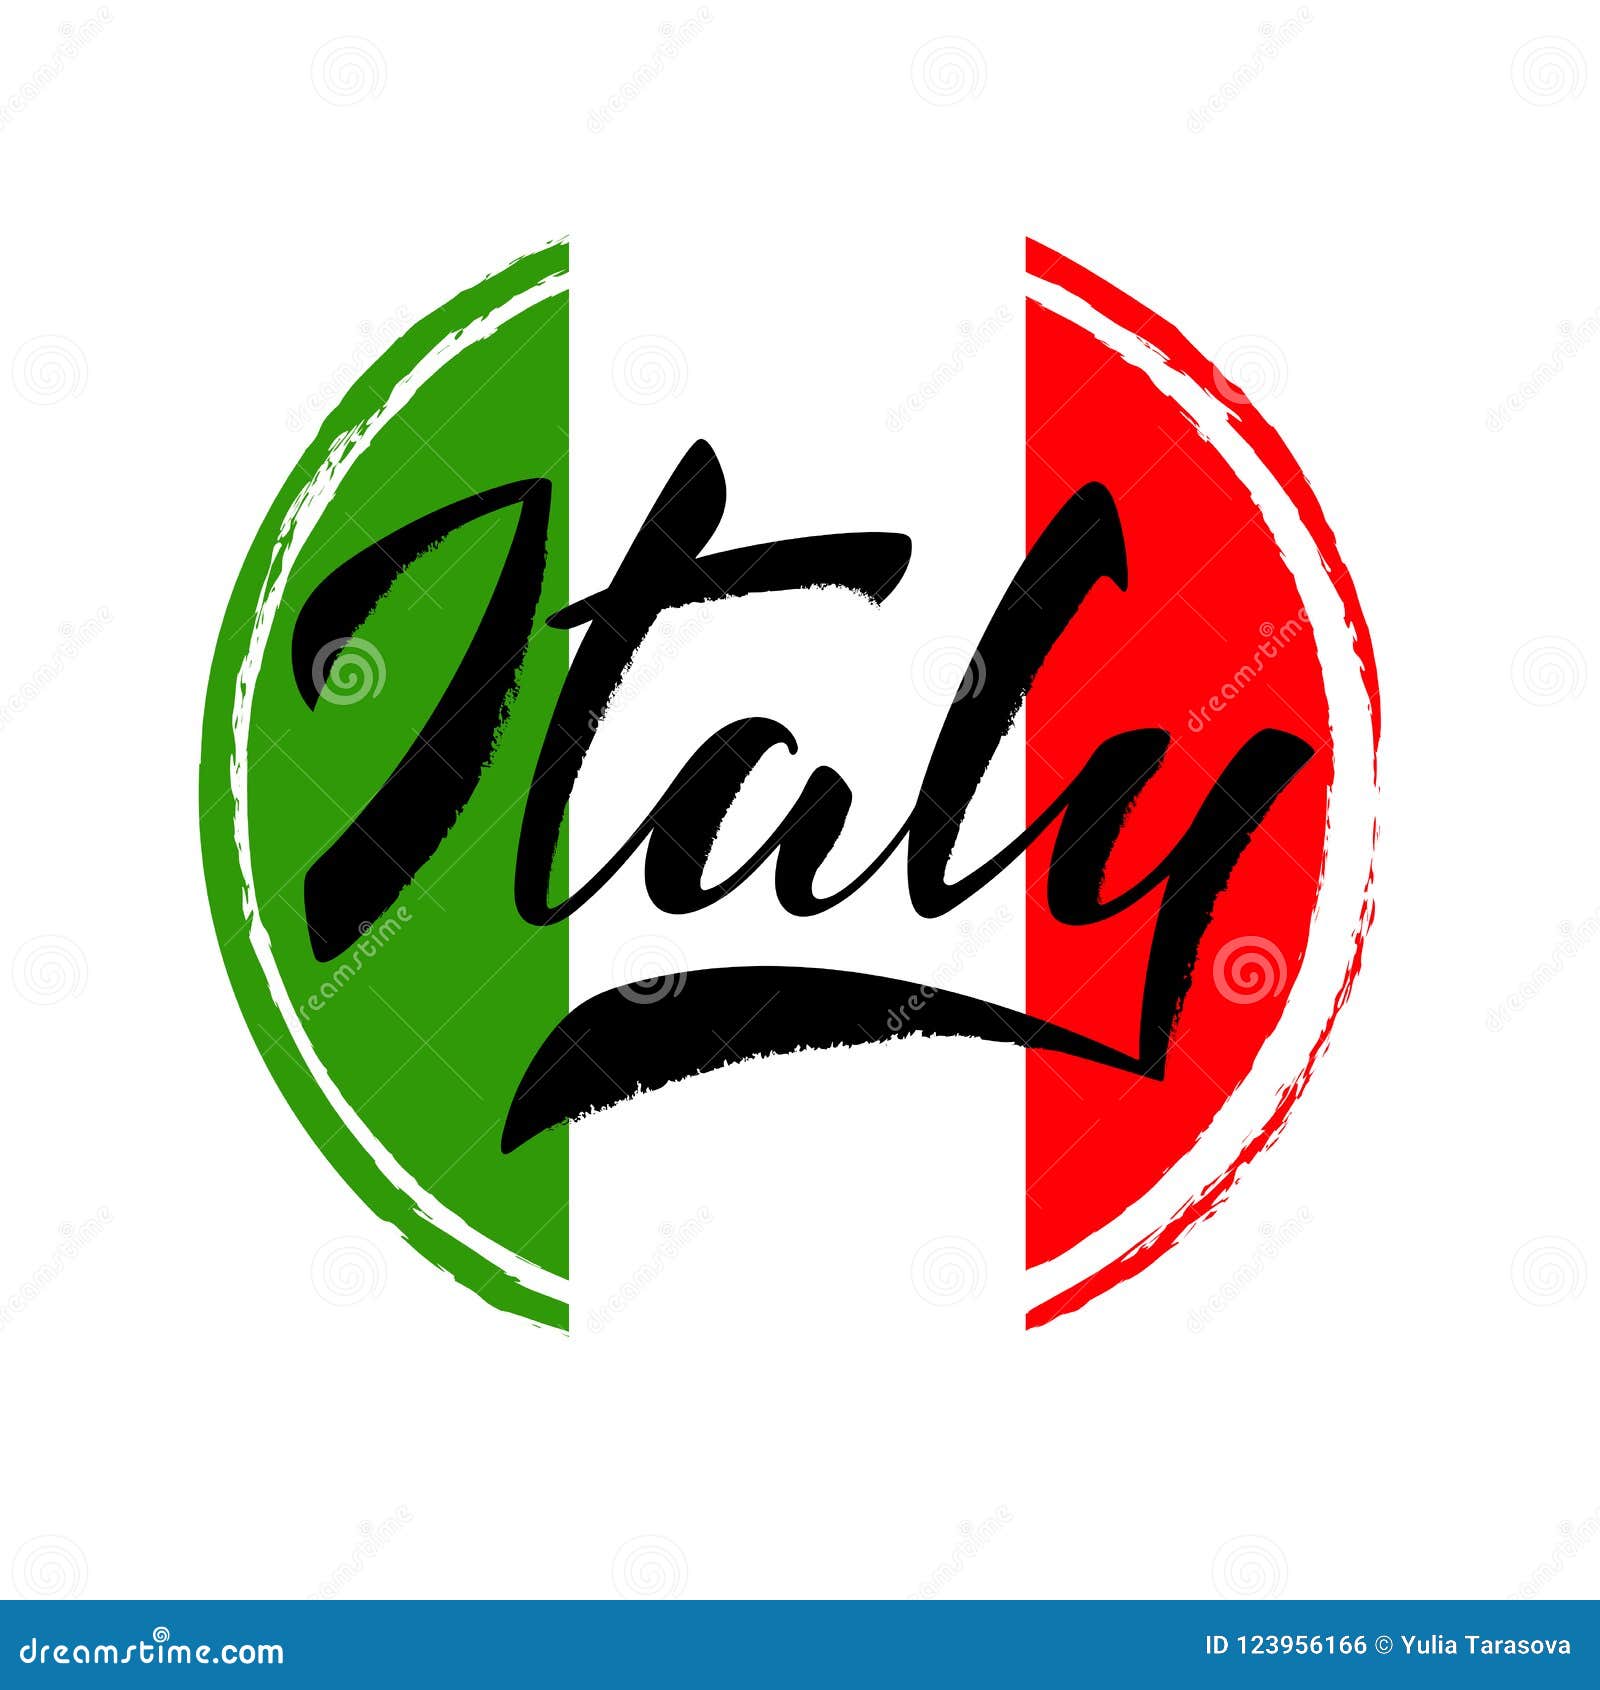 Italy stock vector. Illustration of font, hand, background - 123956166